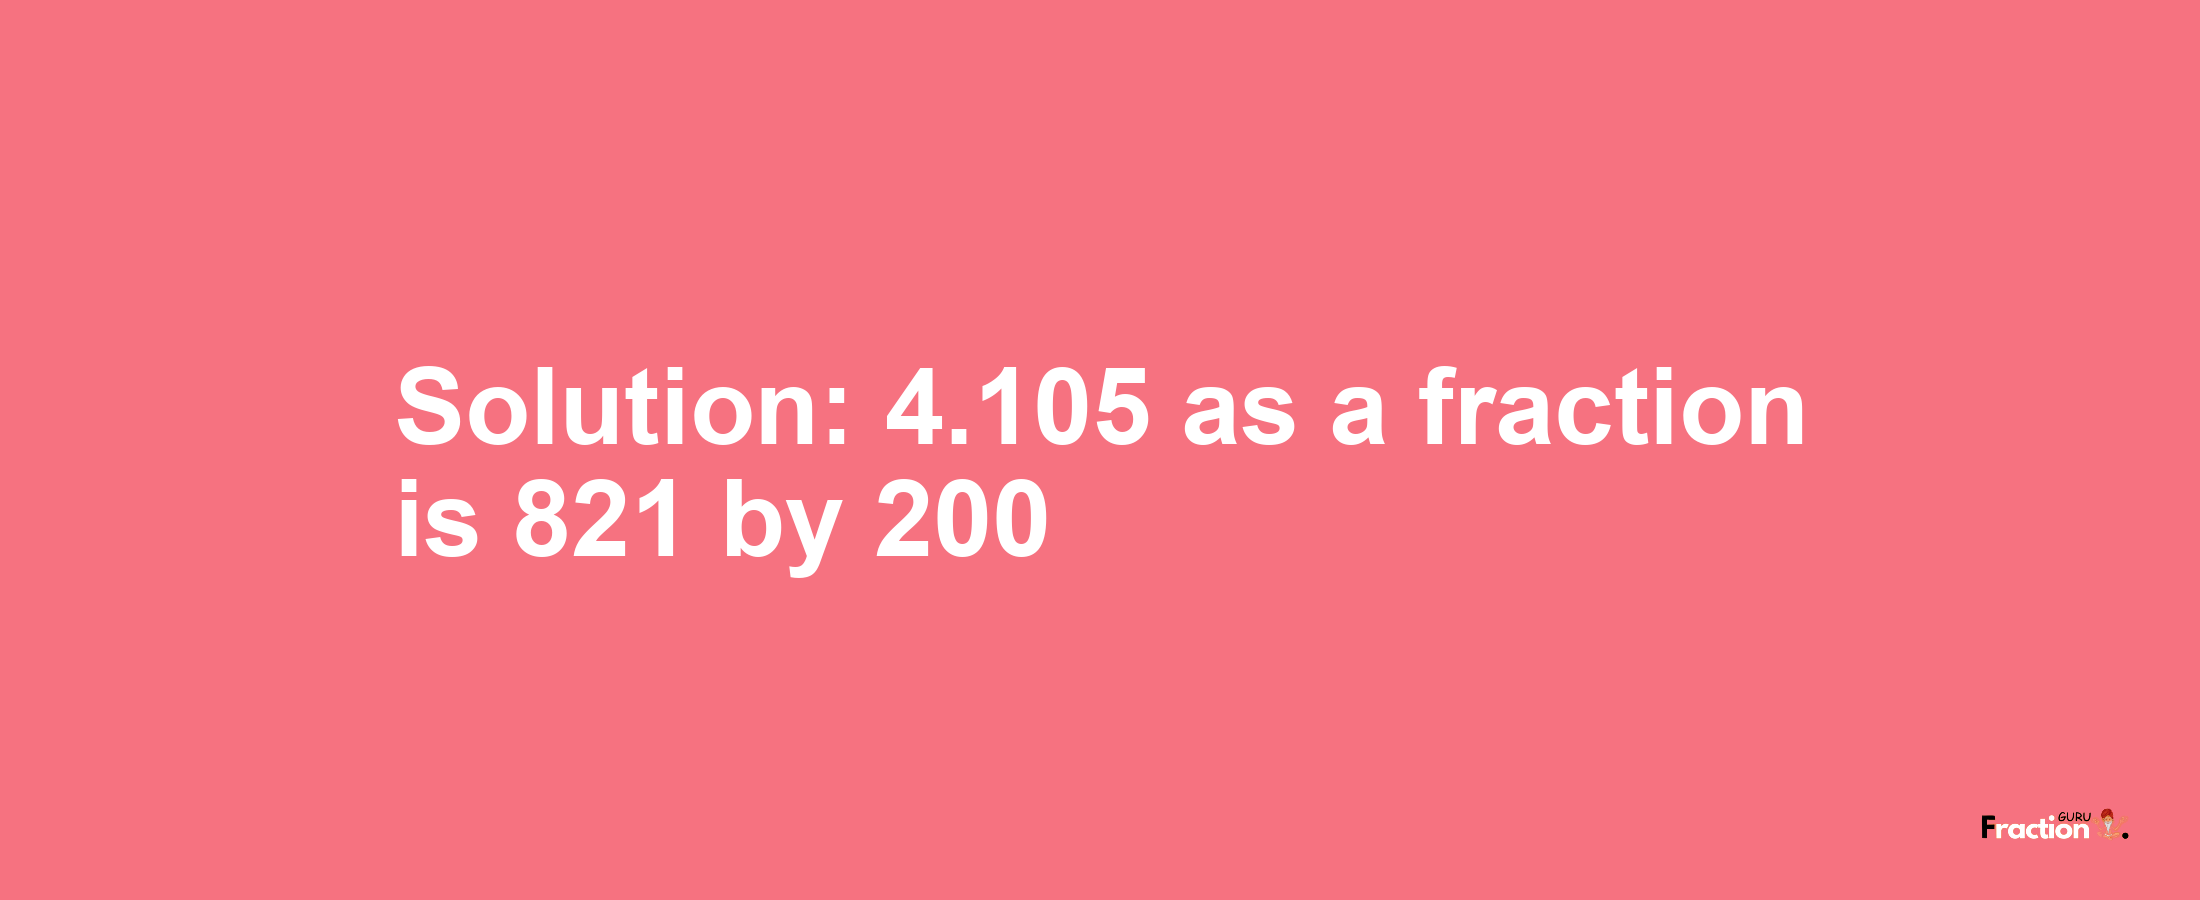 Solution:4.105 as a fraction is 821/200